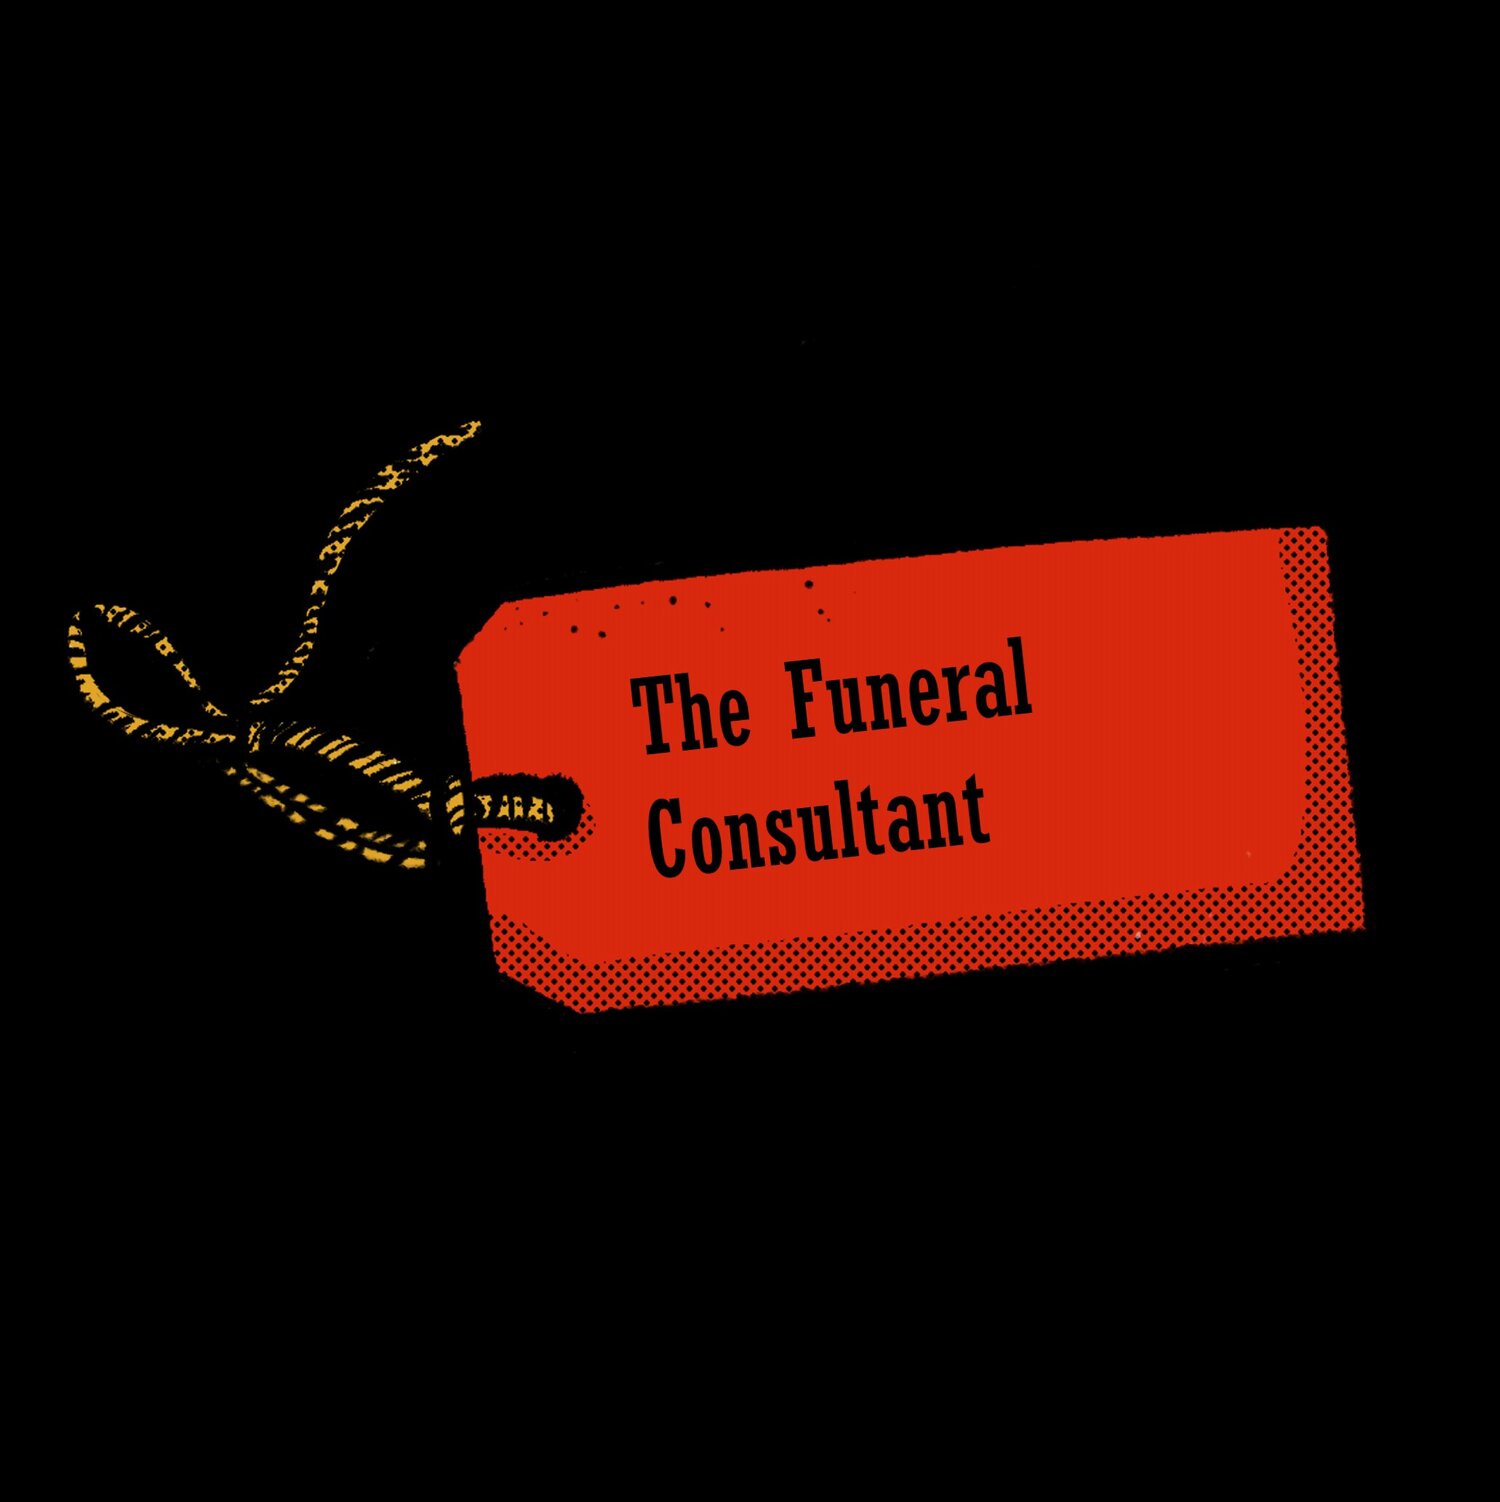 Episode 6: The Funeral Consultant